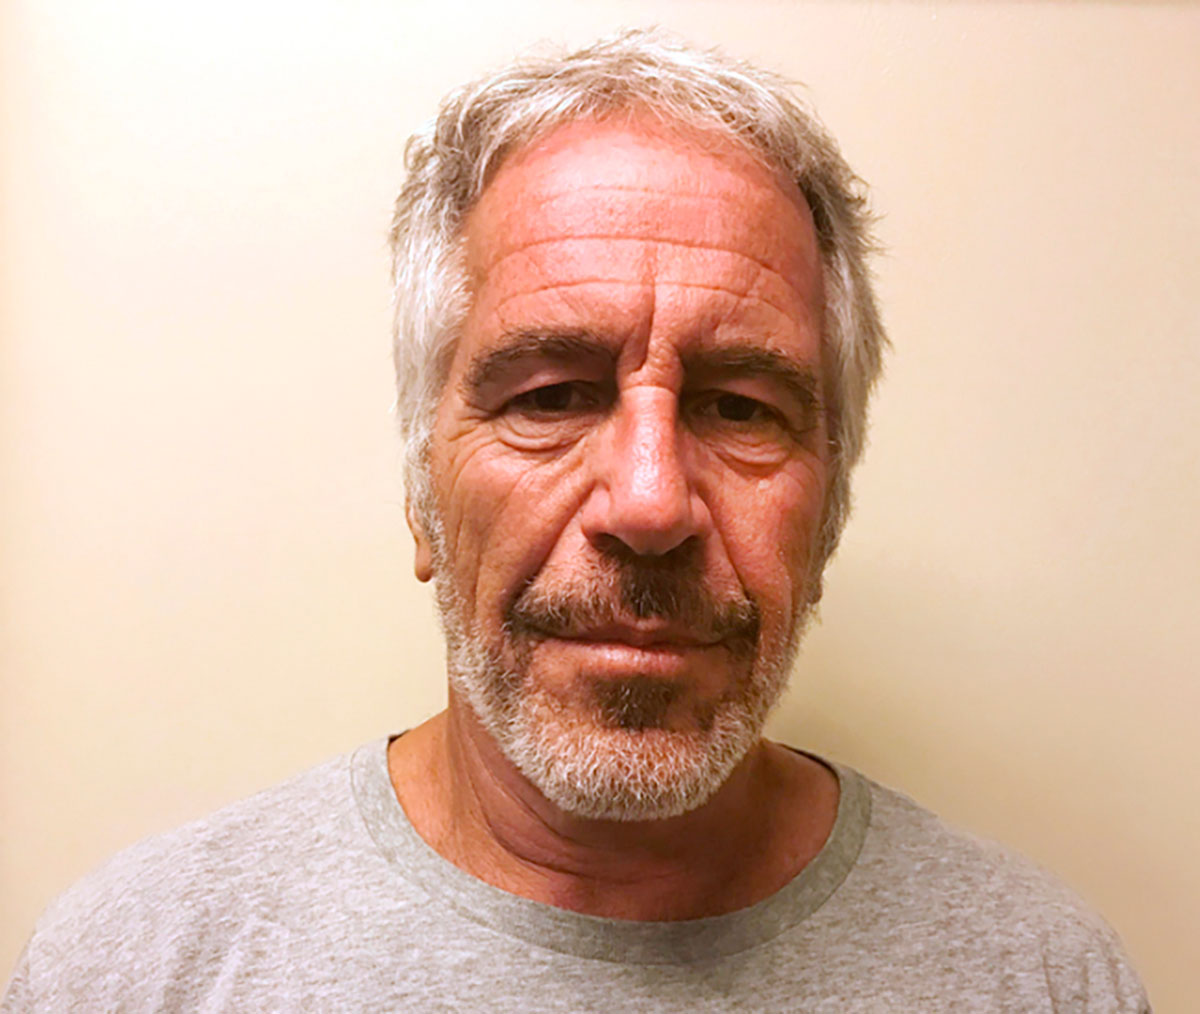 Epstein, 66, had pleaded not guilty and was facing up to 45 years in prison if convicted